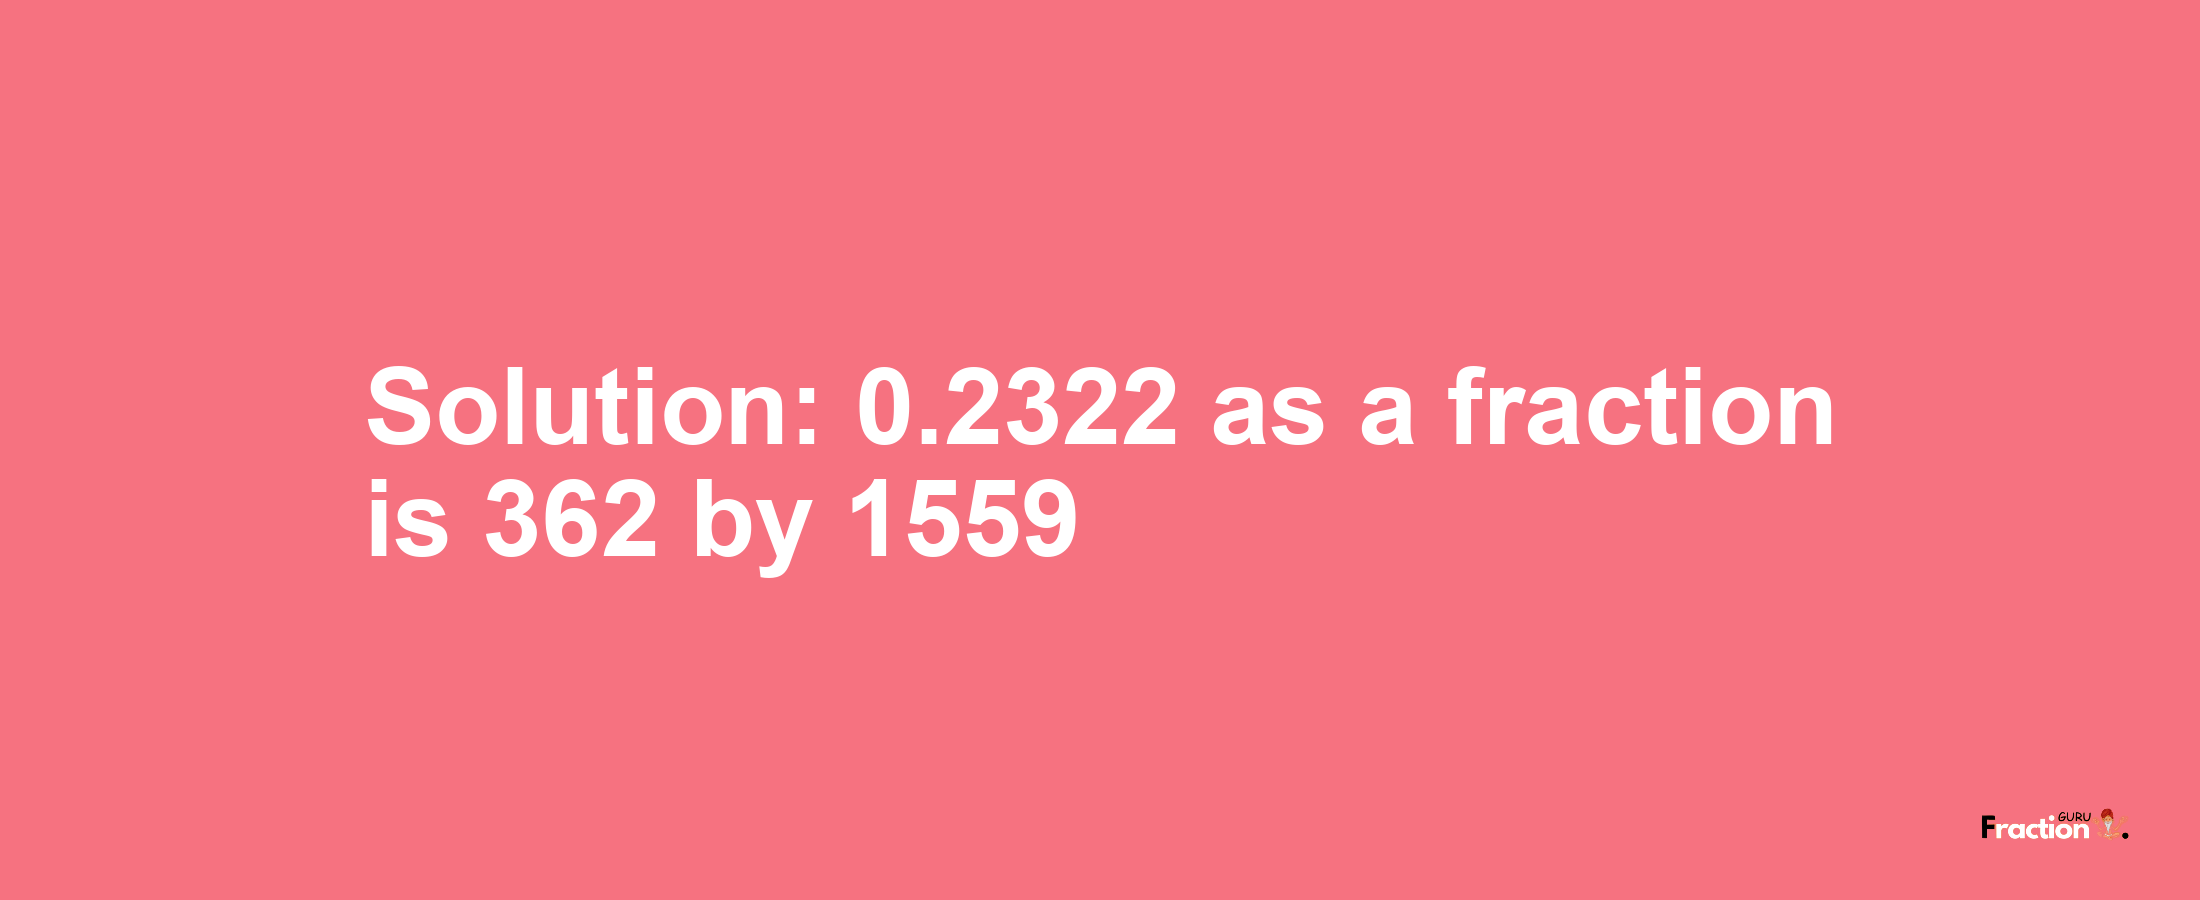 Solution:0.2322 as a fraction is 362/1559